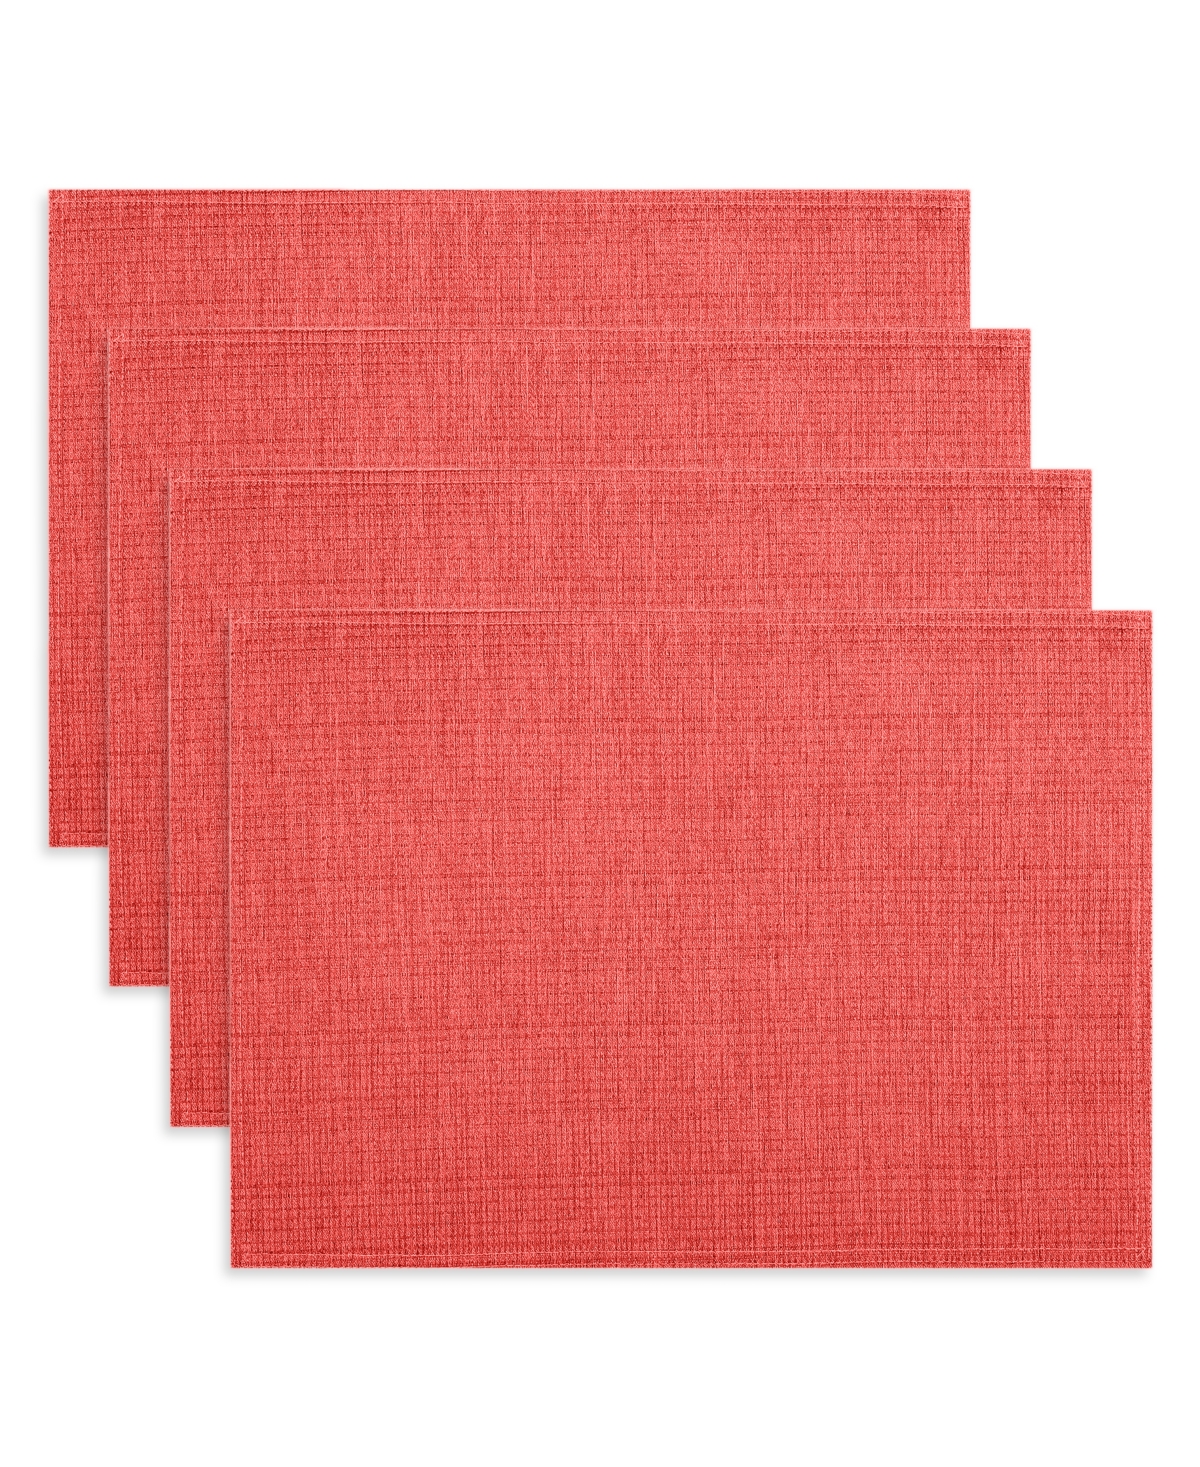 Noritake Colorwave Placemats, 4 Pack In Raspberry